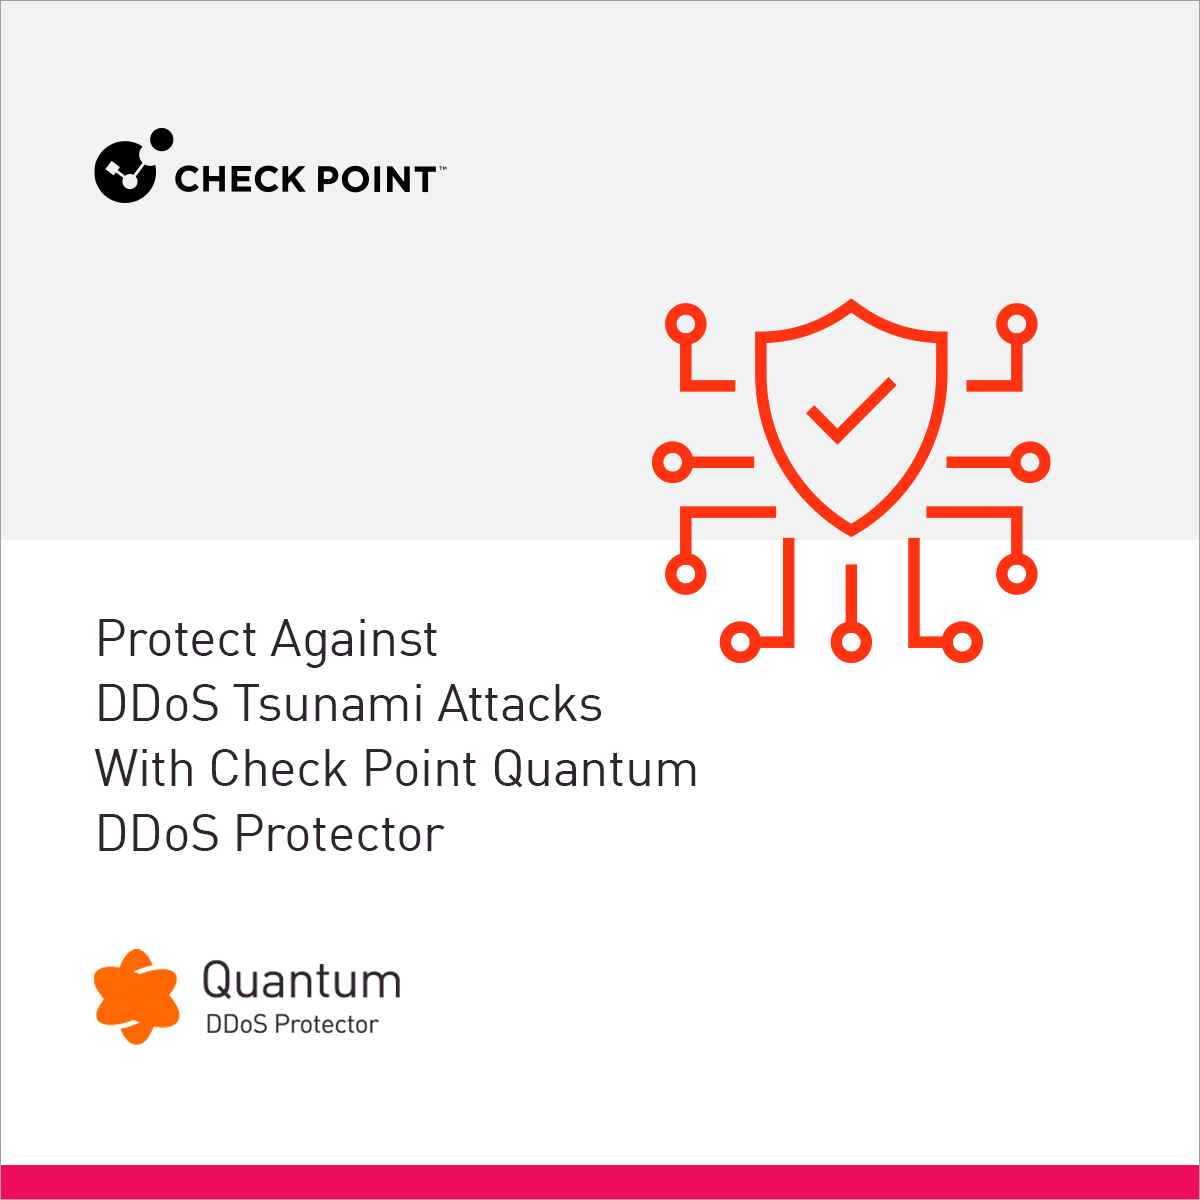 Losing sleep over #DDoS attacks? Check Point Quantum DDoS Protector helps organizations defend against DDoS tsunami attacks without downtime or service disruption. Learn how and see real-life examples: bit.ly/4d6ABhV